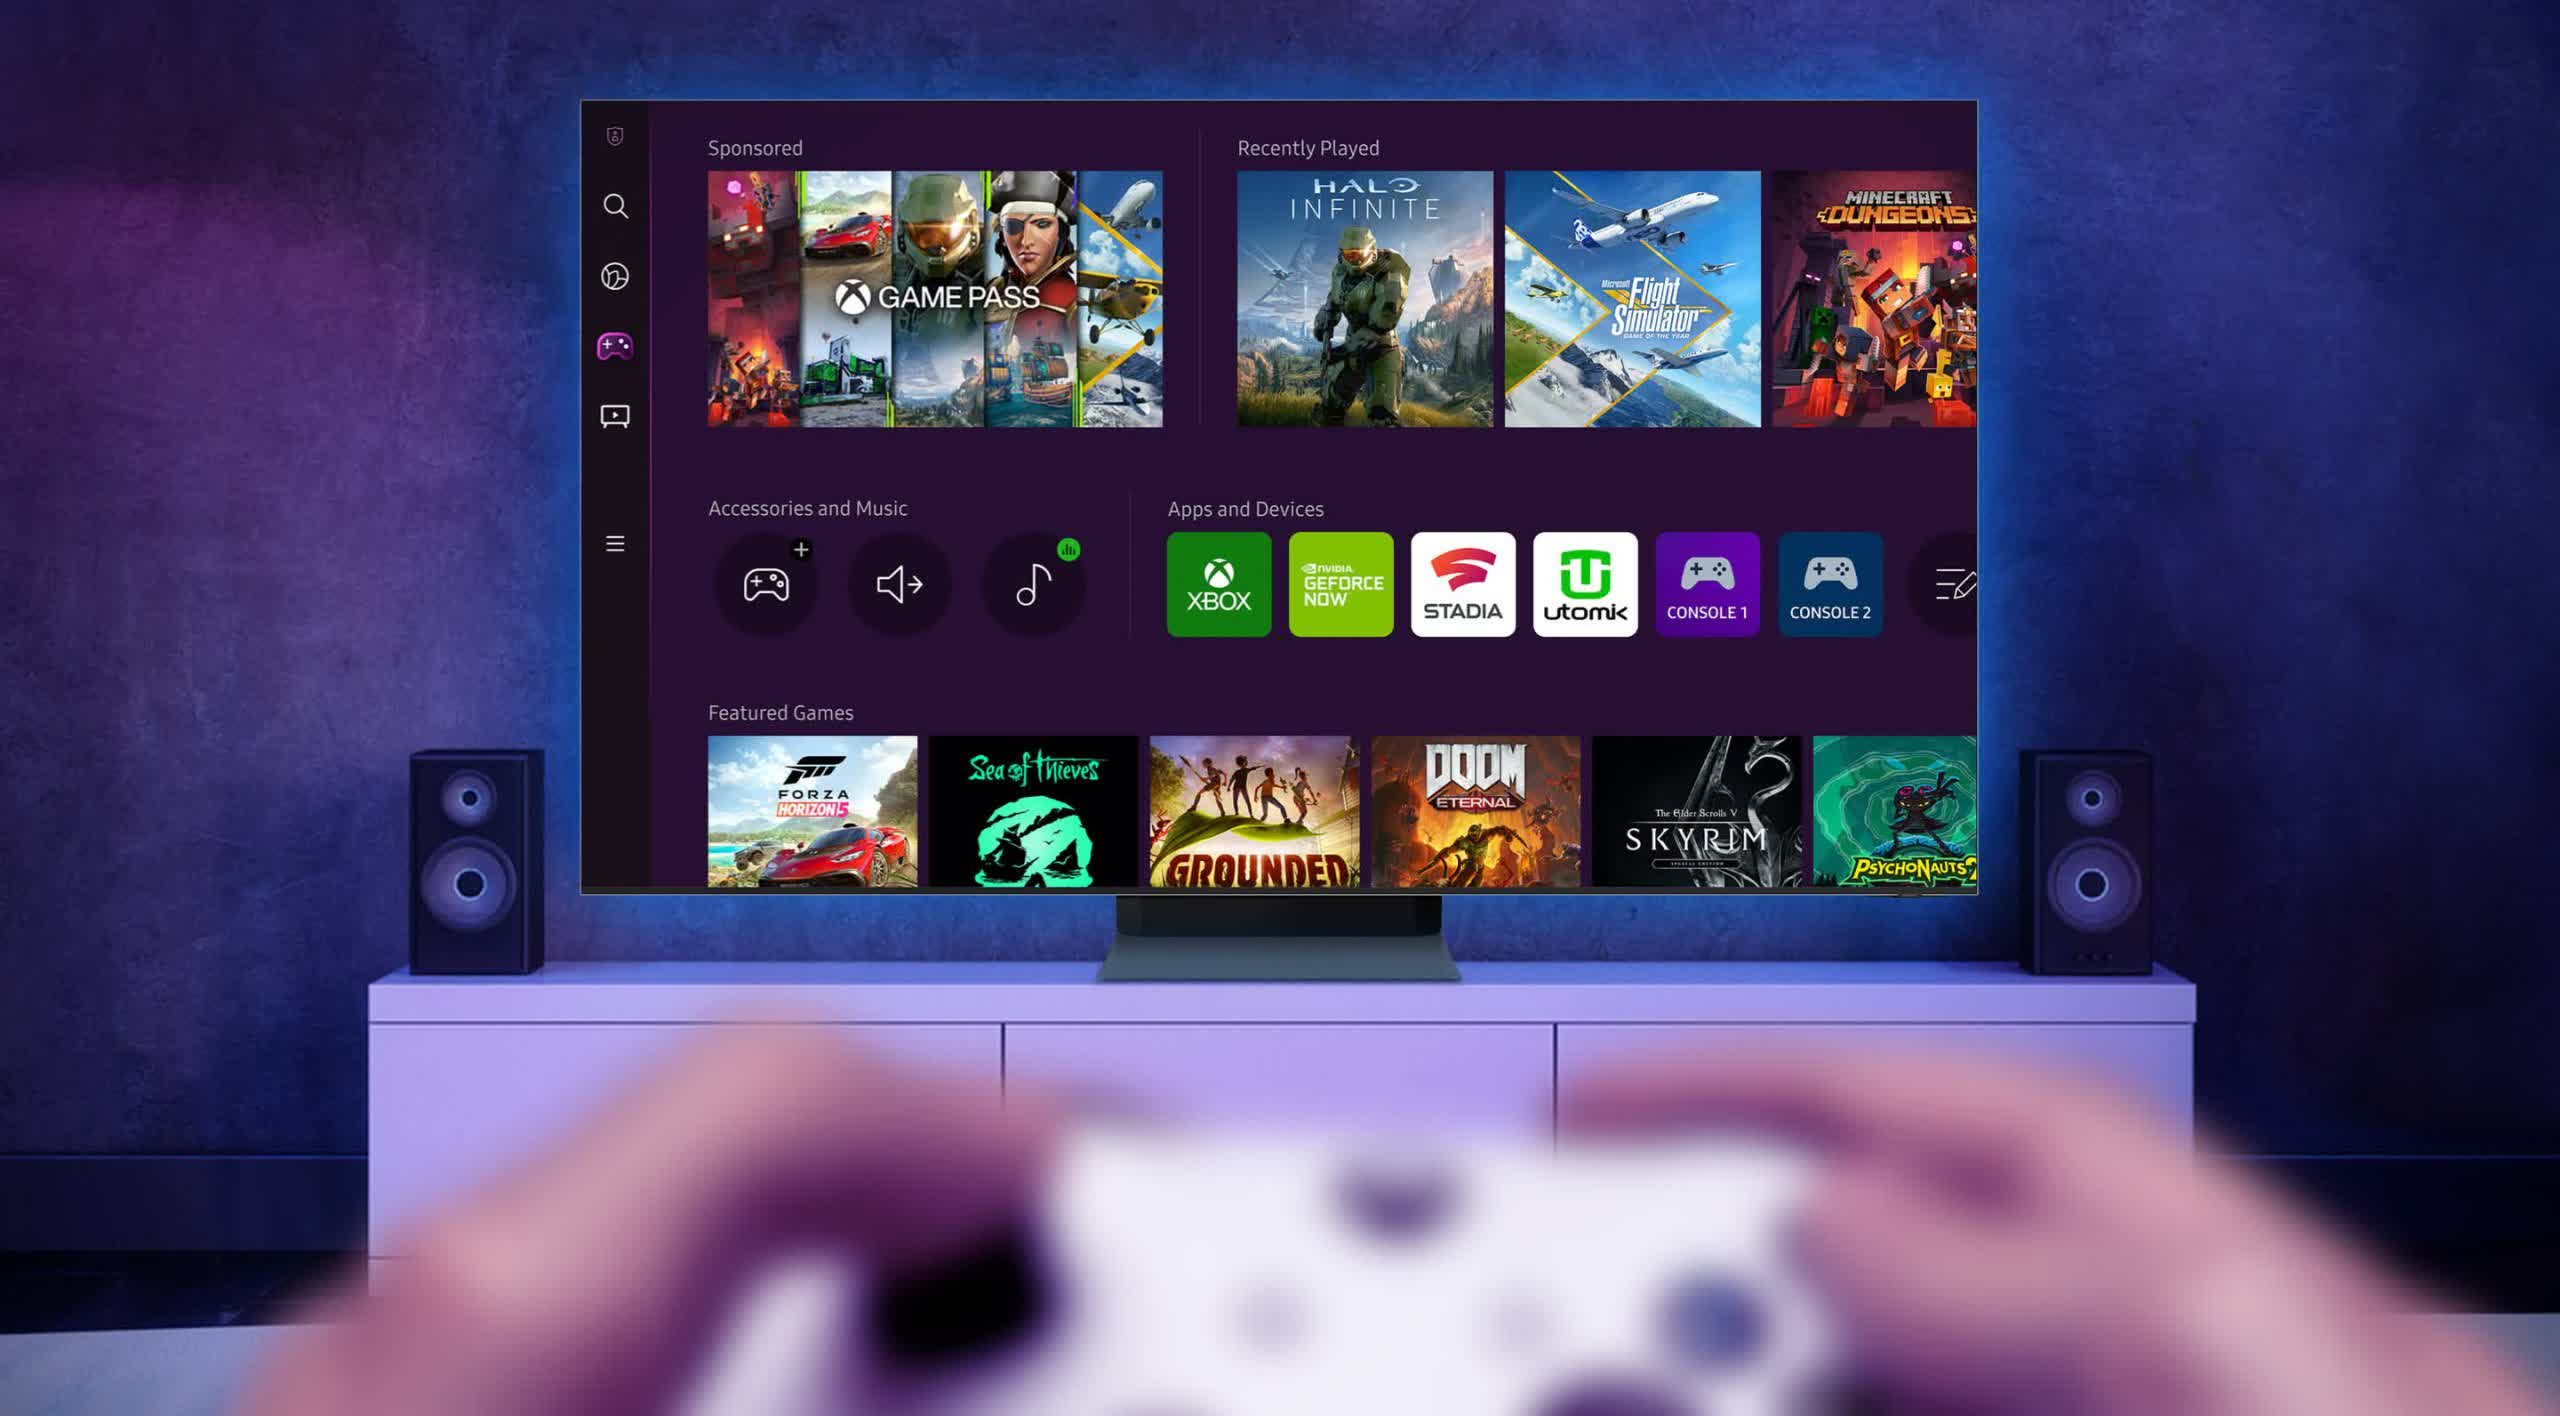 Some Samsung TVs will get Xbox cloud gaming capabilities, no console required